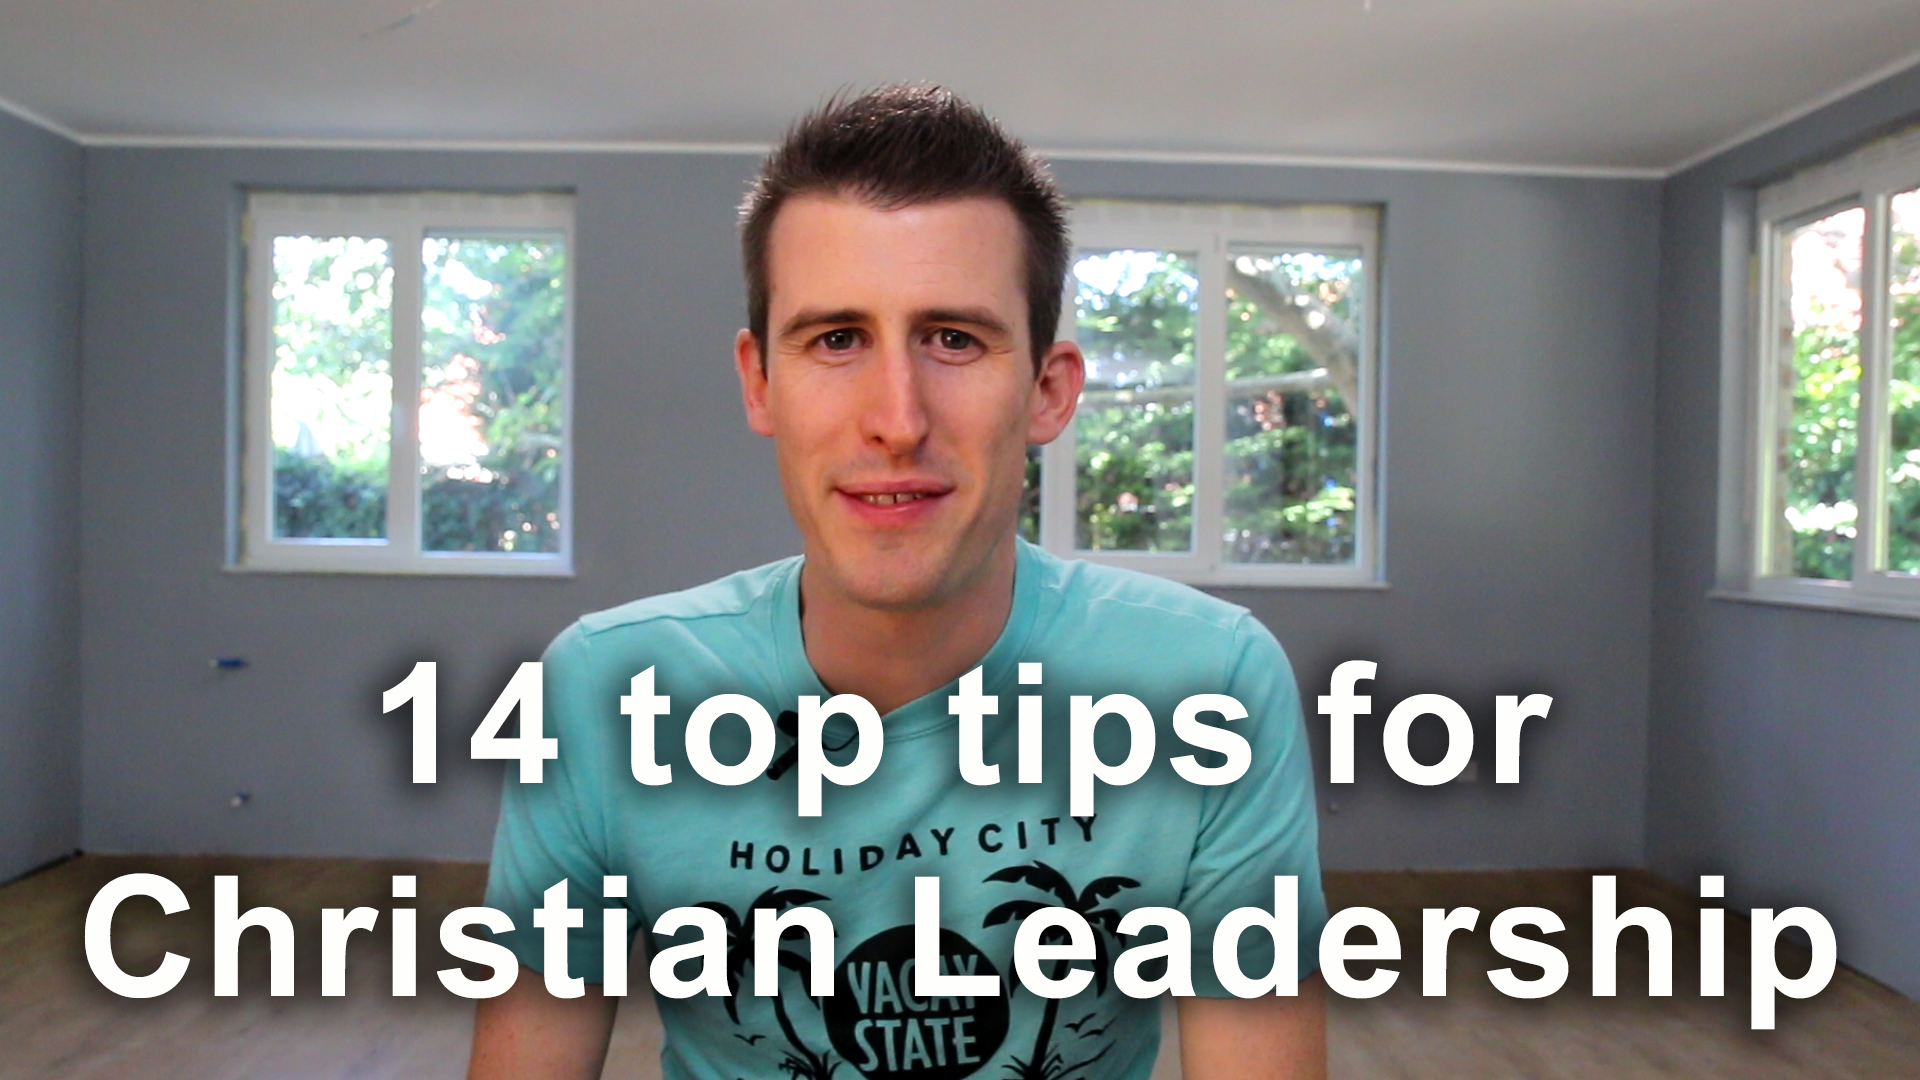 14 top tips for Christian Leadership with David Steele